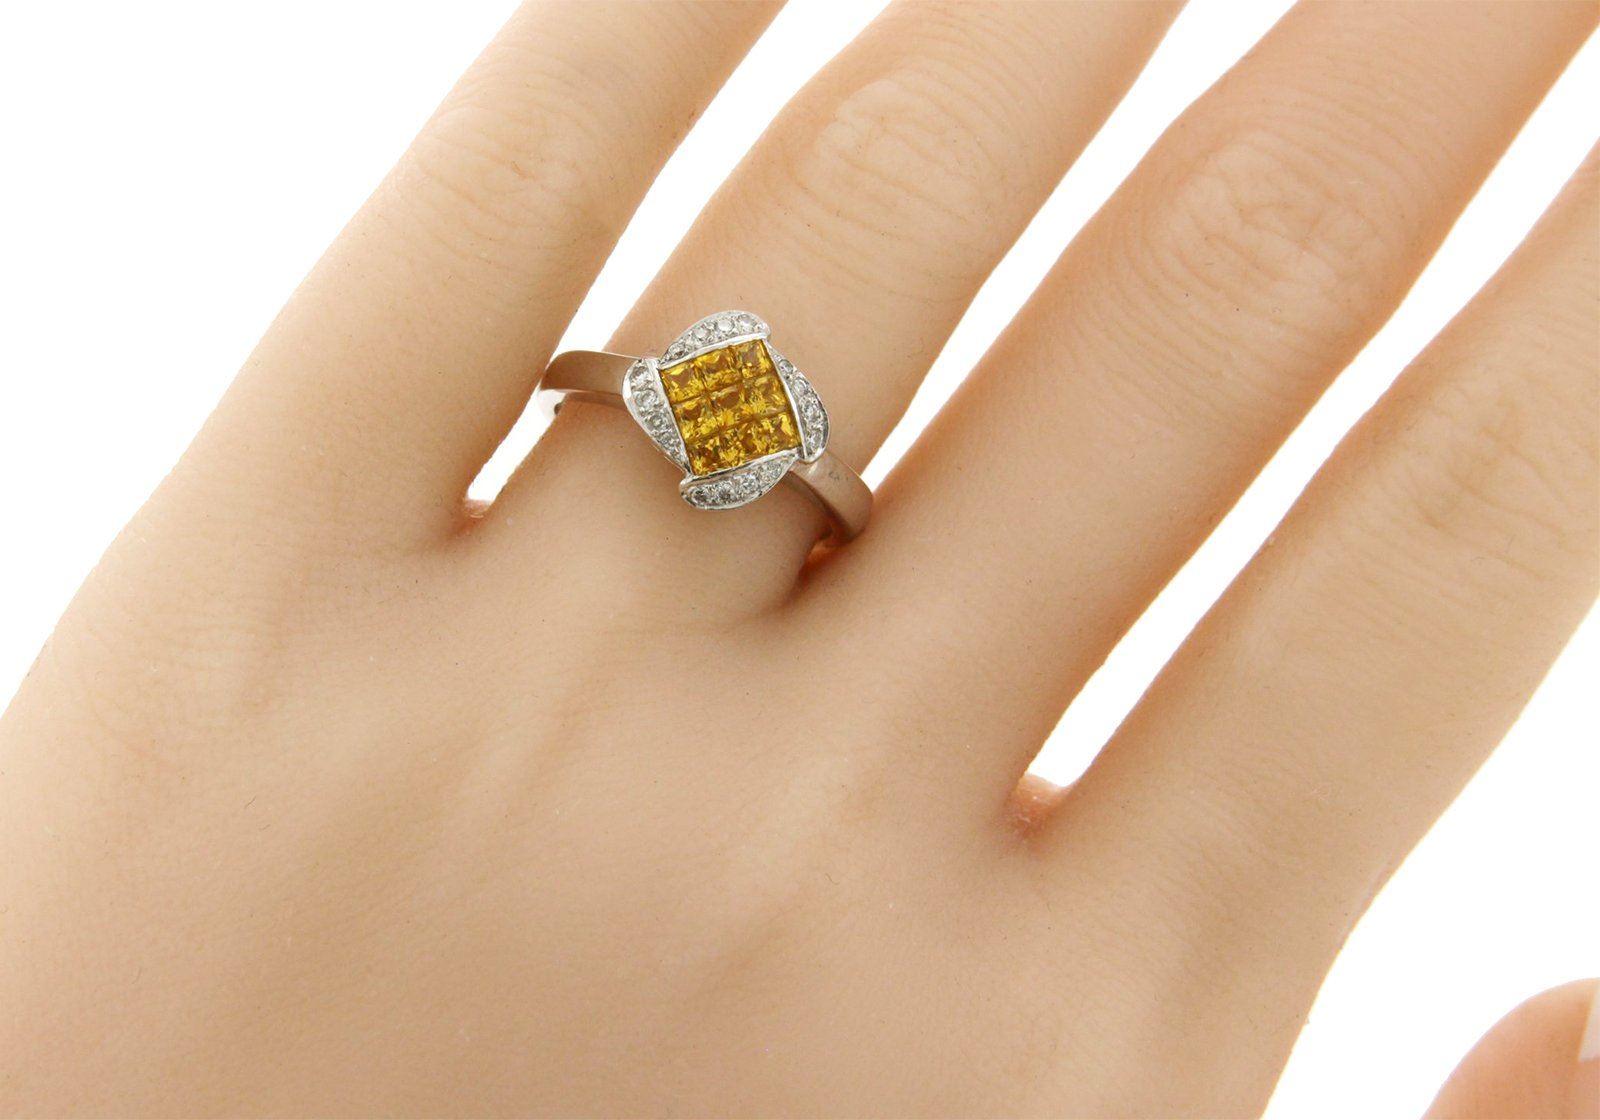 Top: 11 mm

Band Width: 2.6 mm

Metal: 18K White Gold 

Size: 6 to 8 ( Please message Us for your Size )

Hallmarks: 18K

Total Weight: 4 Grams

Stone Type: 0.12 CT G SI1 Diamonds & 1.02 Natural Yellow Sapphire

Condition: New

Estimated Retail